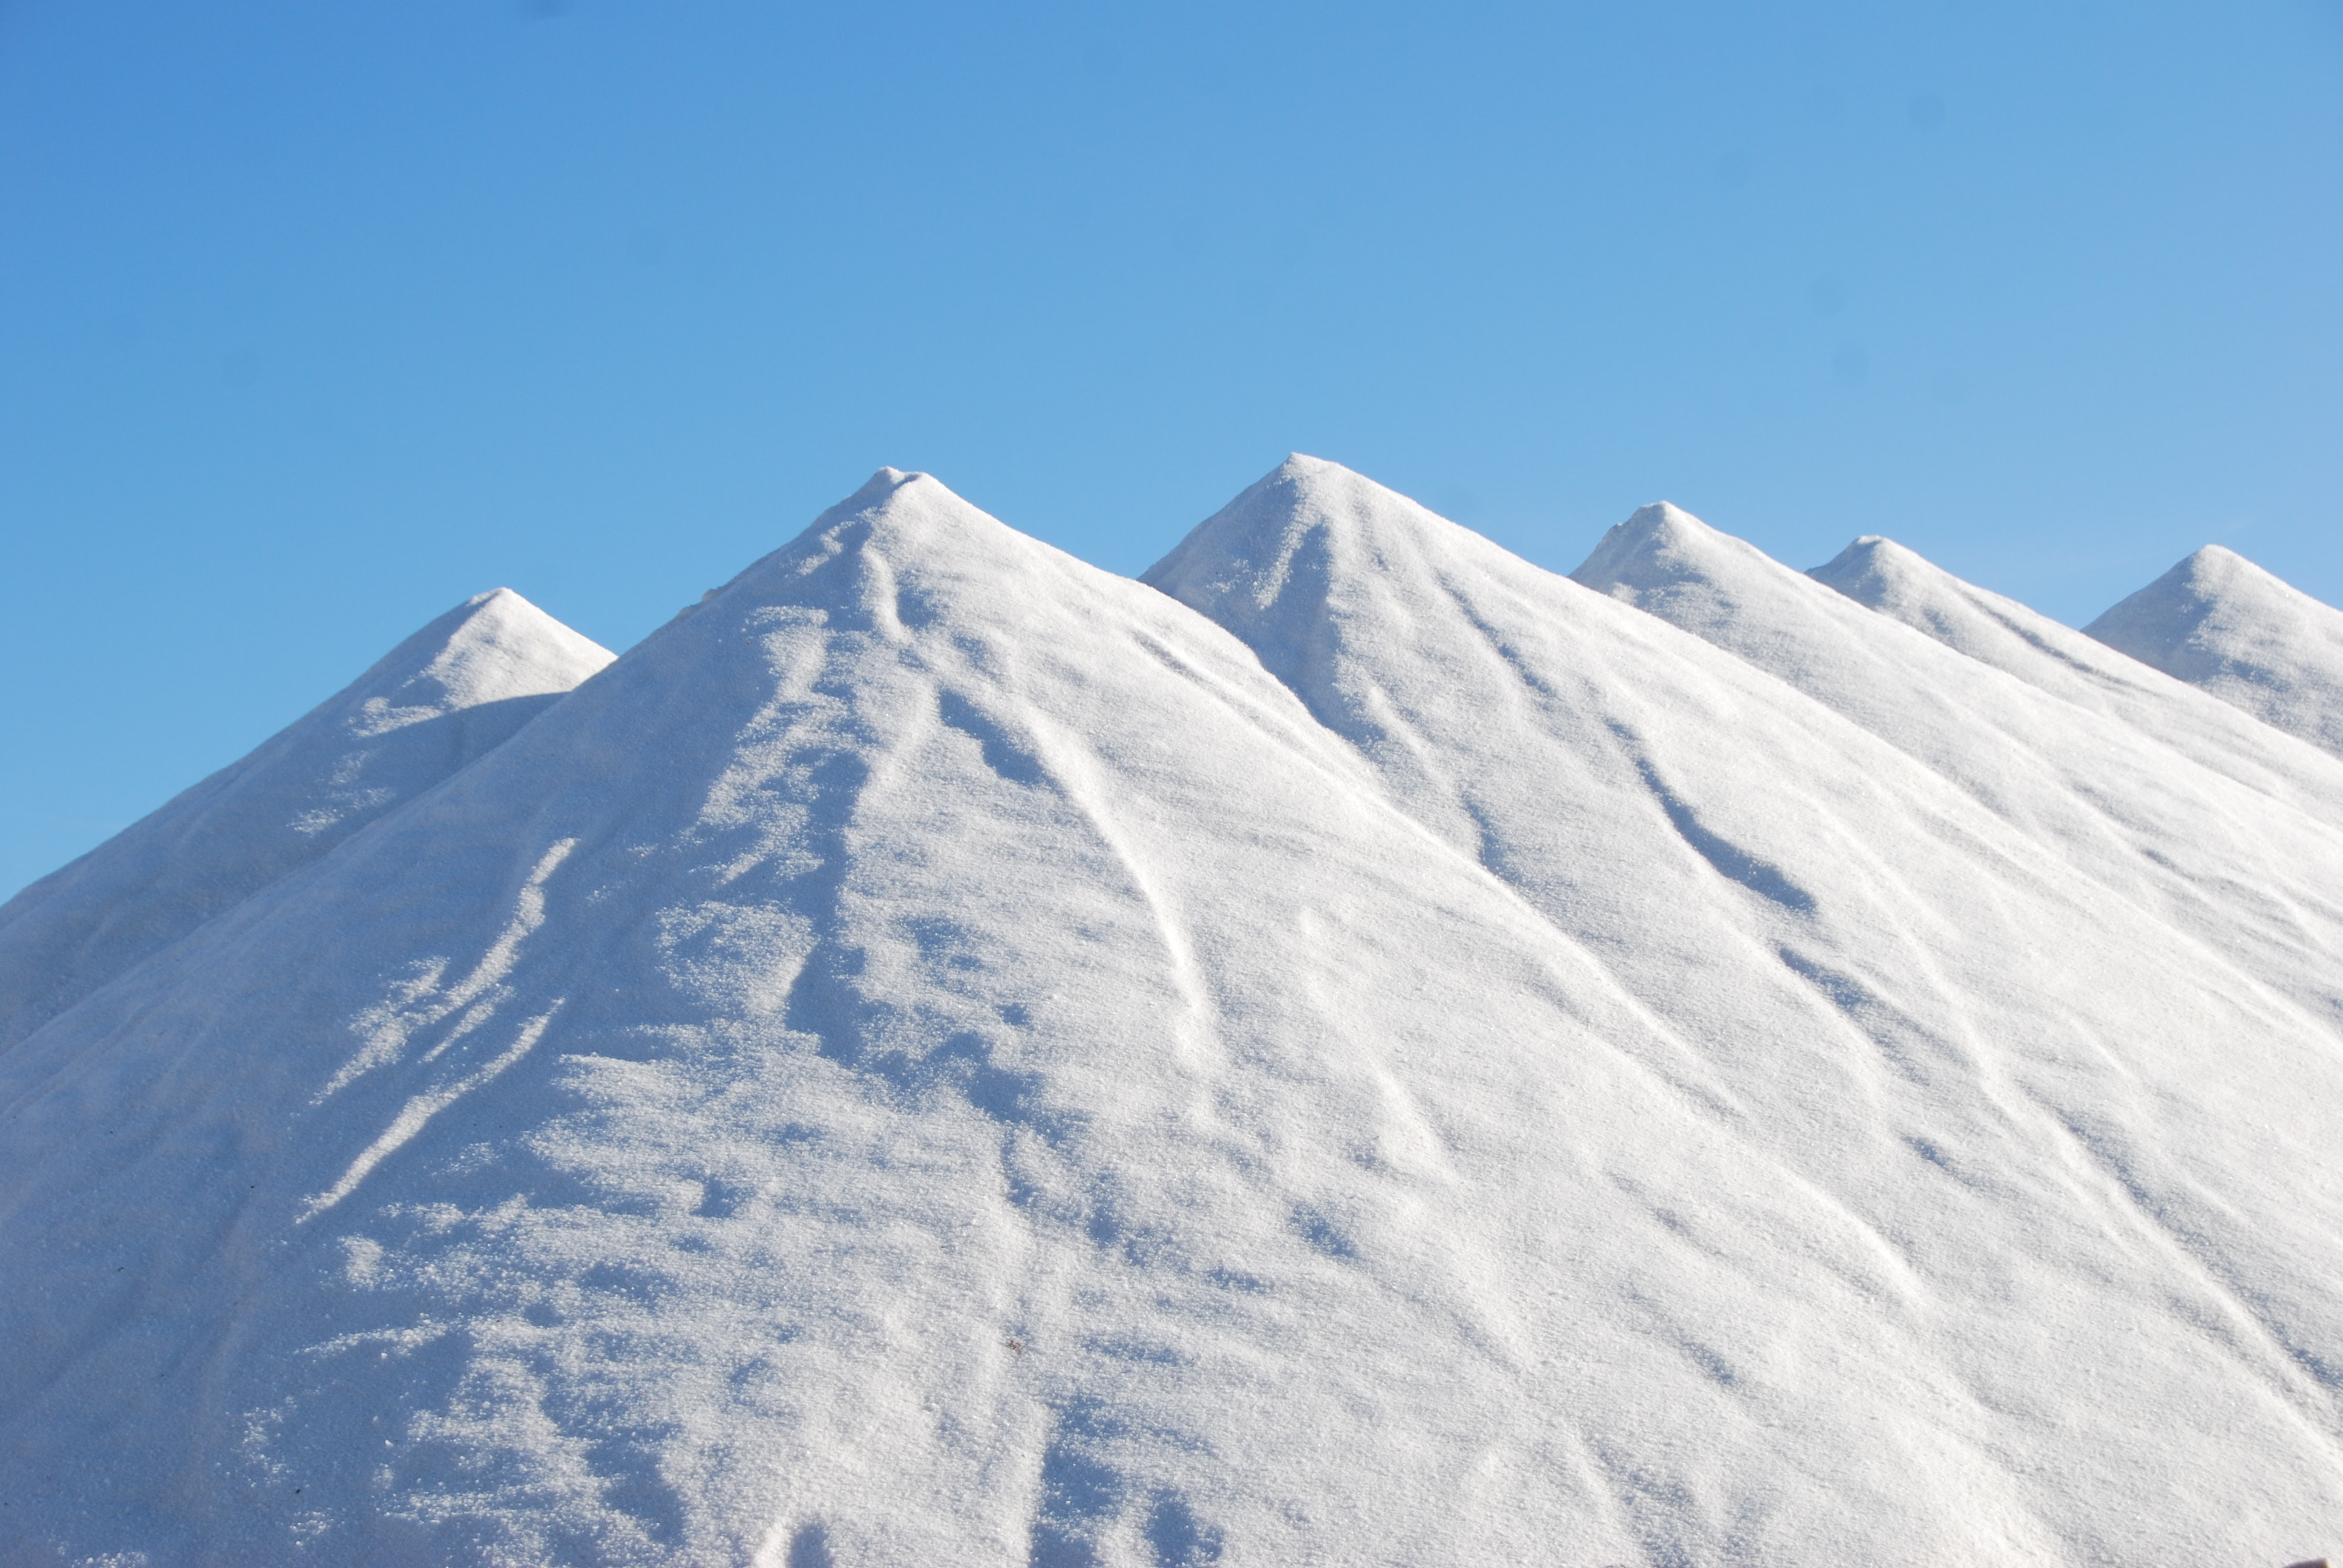 Snow covered mountain under blue sky at daytime photo